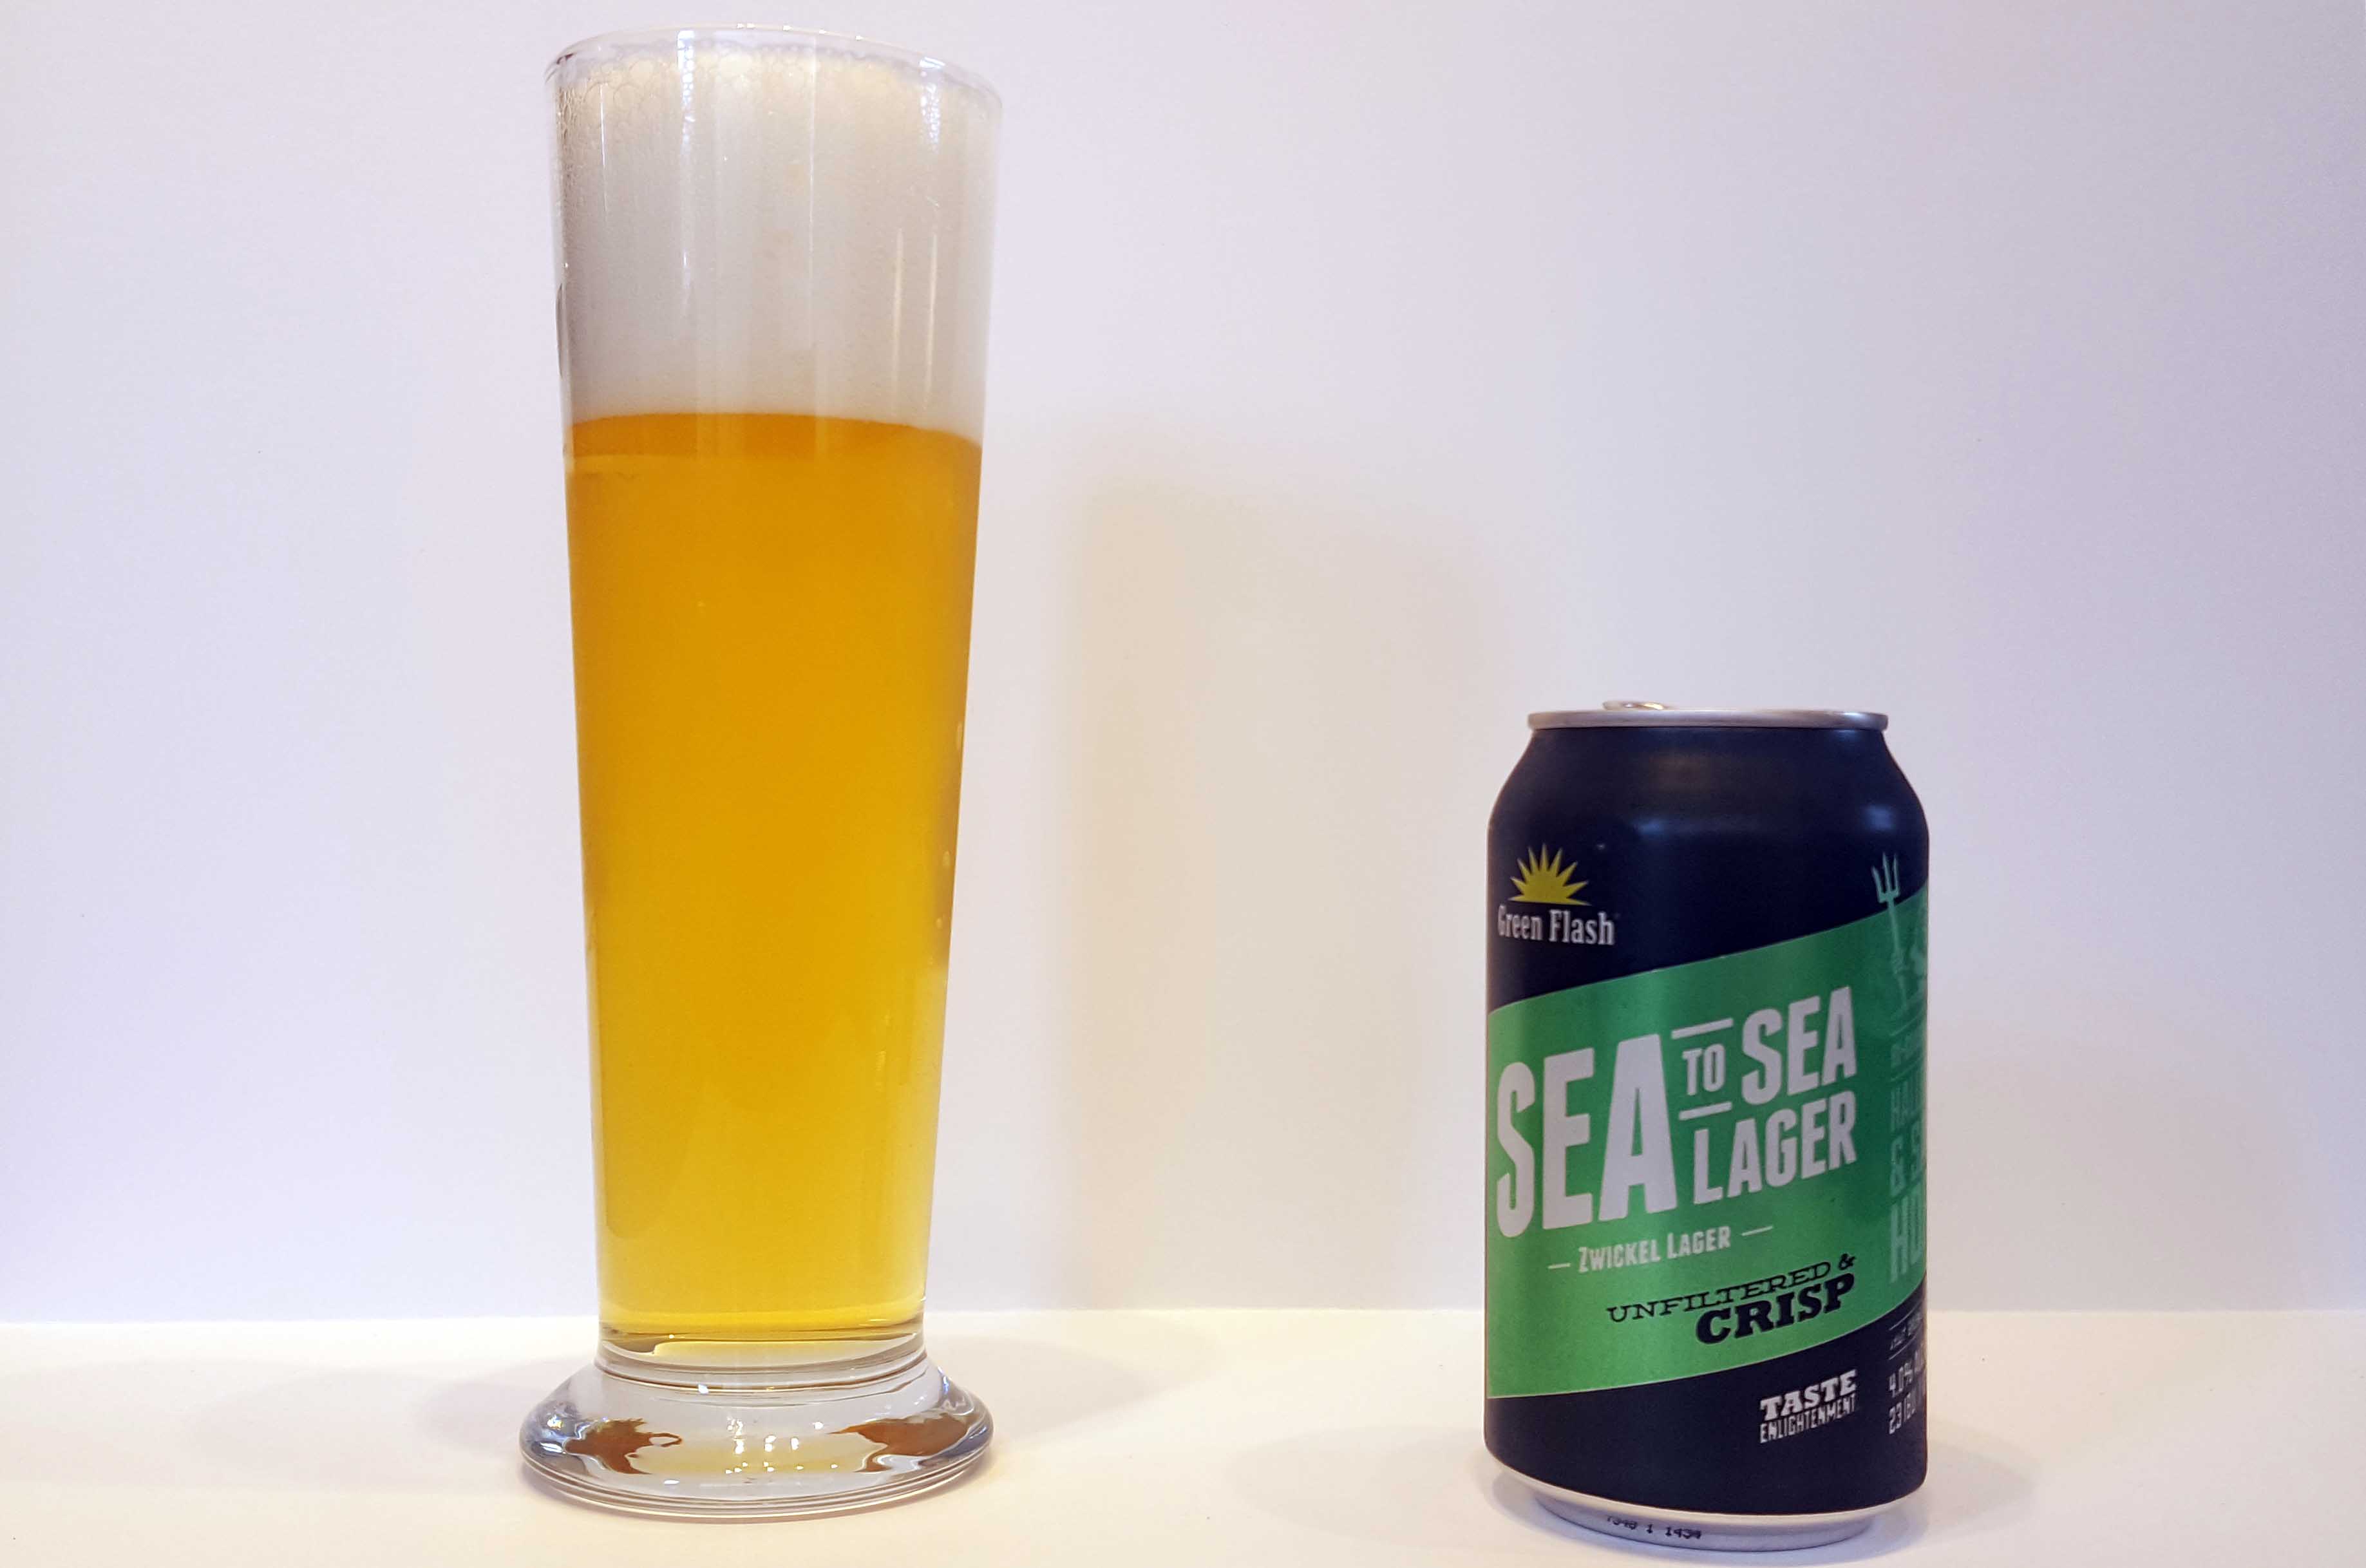 Green Flash Sea to Sea Lager